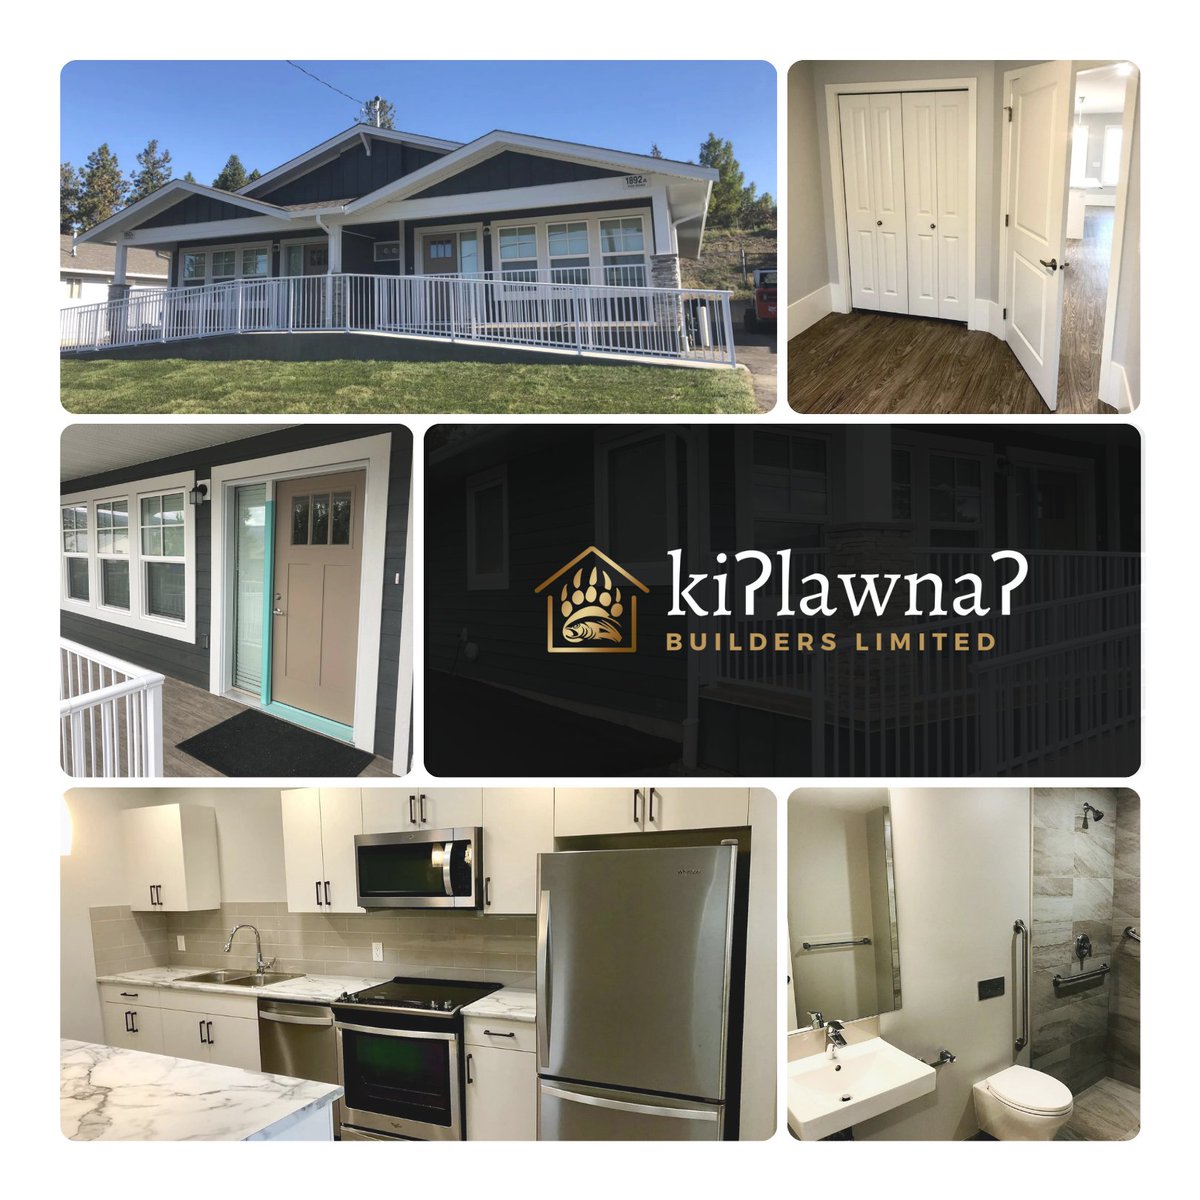 Take an exclusive look at our recently completed rental duplex rebuild for WFN! Witness the seamless fusion of quality craftsmanship and innovative design. 🏘️✨

#ProjectDelivery #ConstructionManagement #WFN #KilawnaBuilders